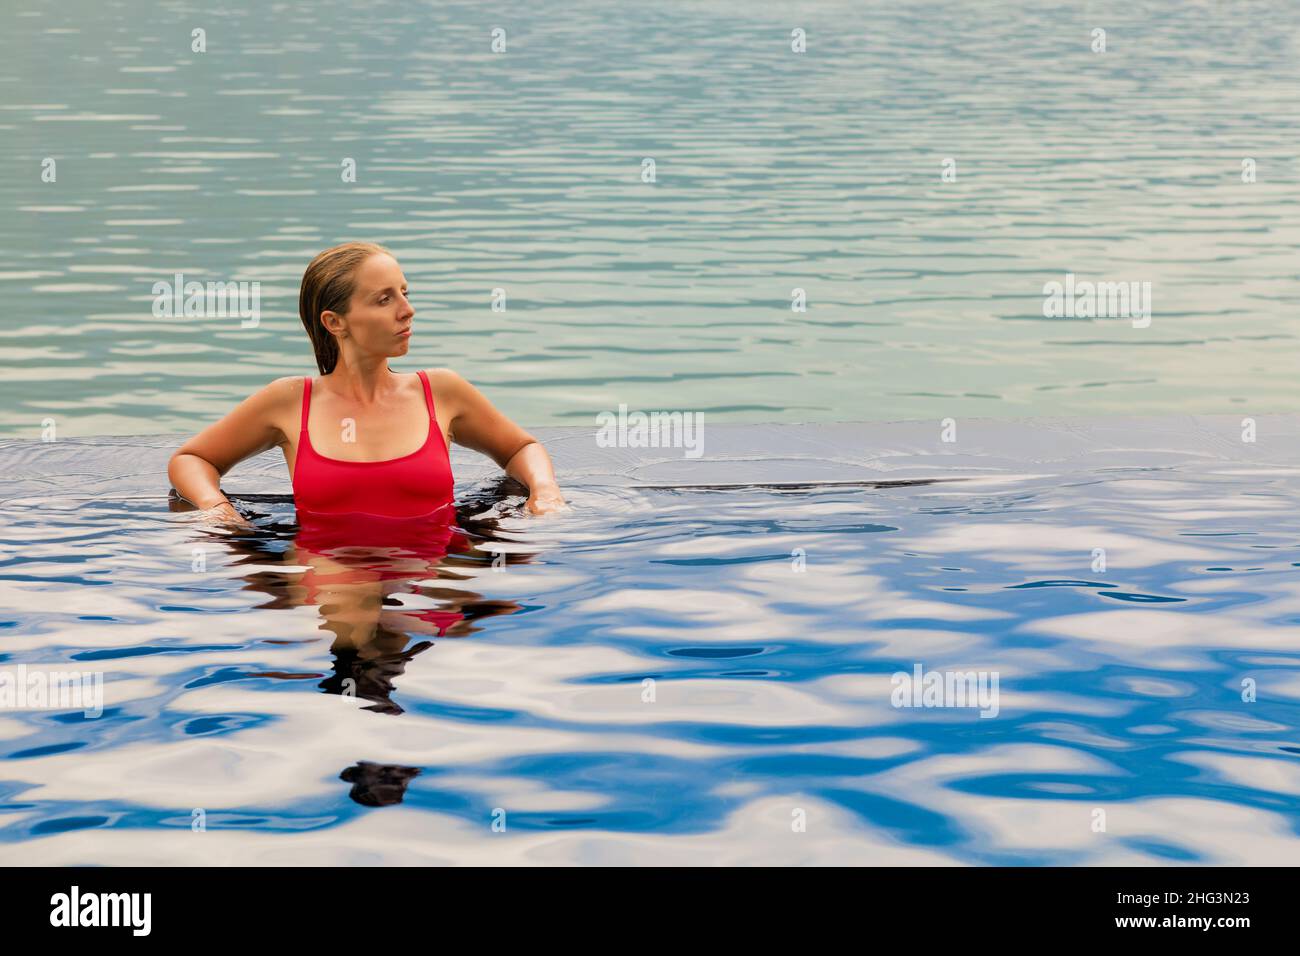 Young woman relax in infinity pool with lake view. Natural hot spring spa under Batur volcano. Travel in Kintamani, Bali. Healthy lifestyle Stock Photo